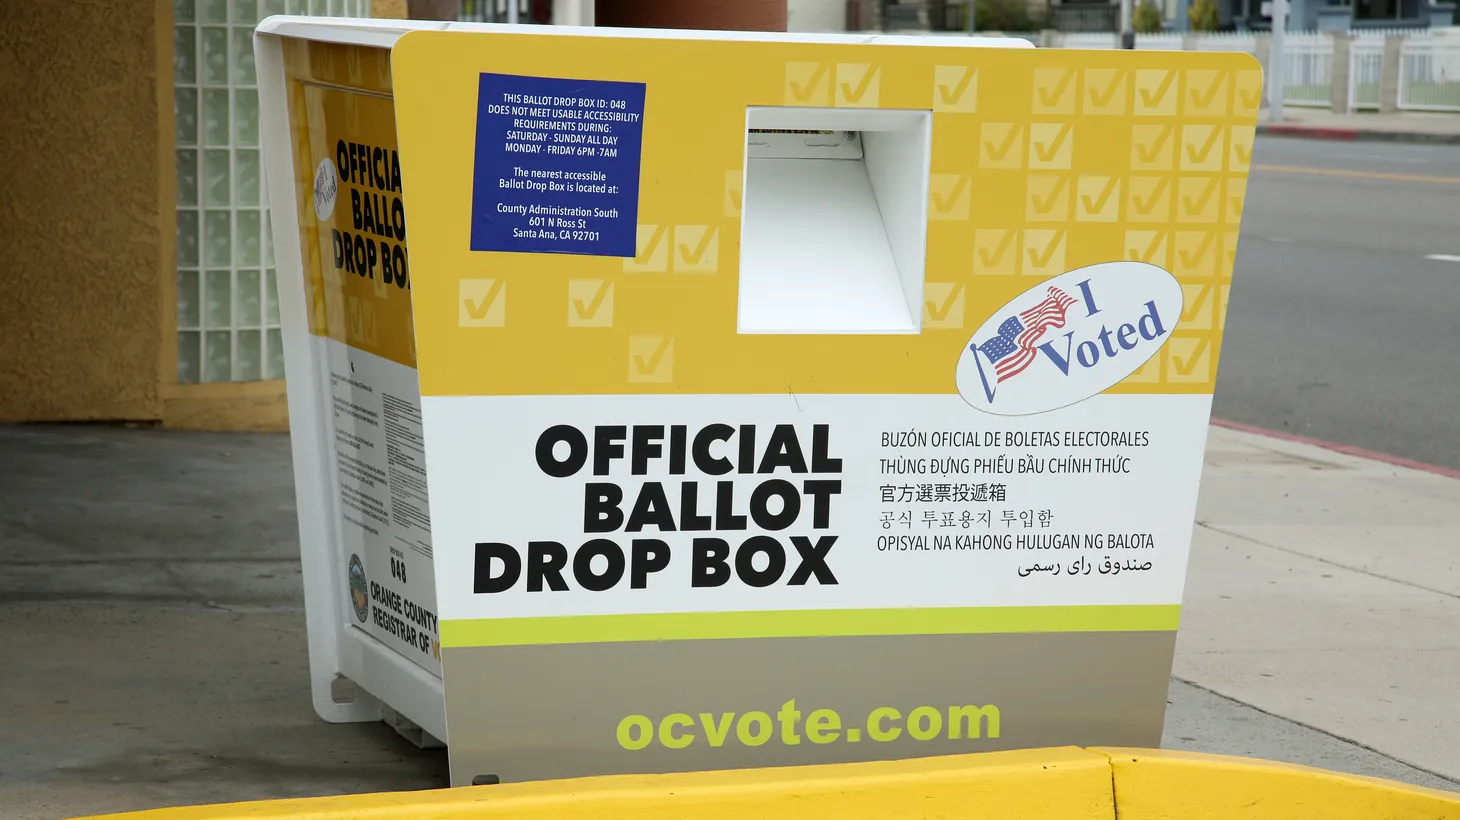 An official ballot drop box is seen in Santa Ana, California. The U.S. Census reports that nearly 43% of the city’s population is foreign-born, and Gustavo Arellano notes that 80,000 are undocumented.